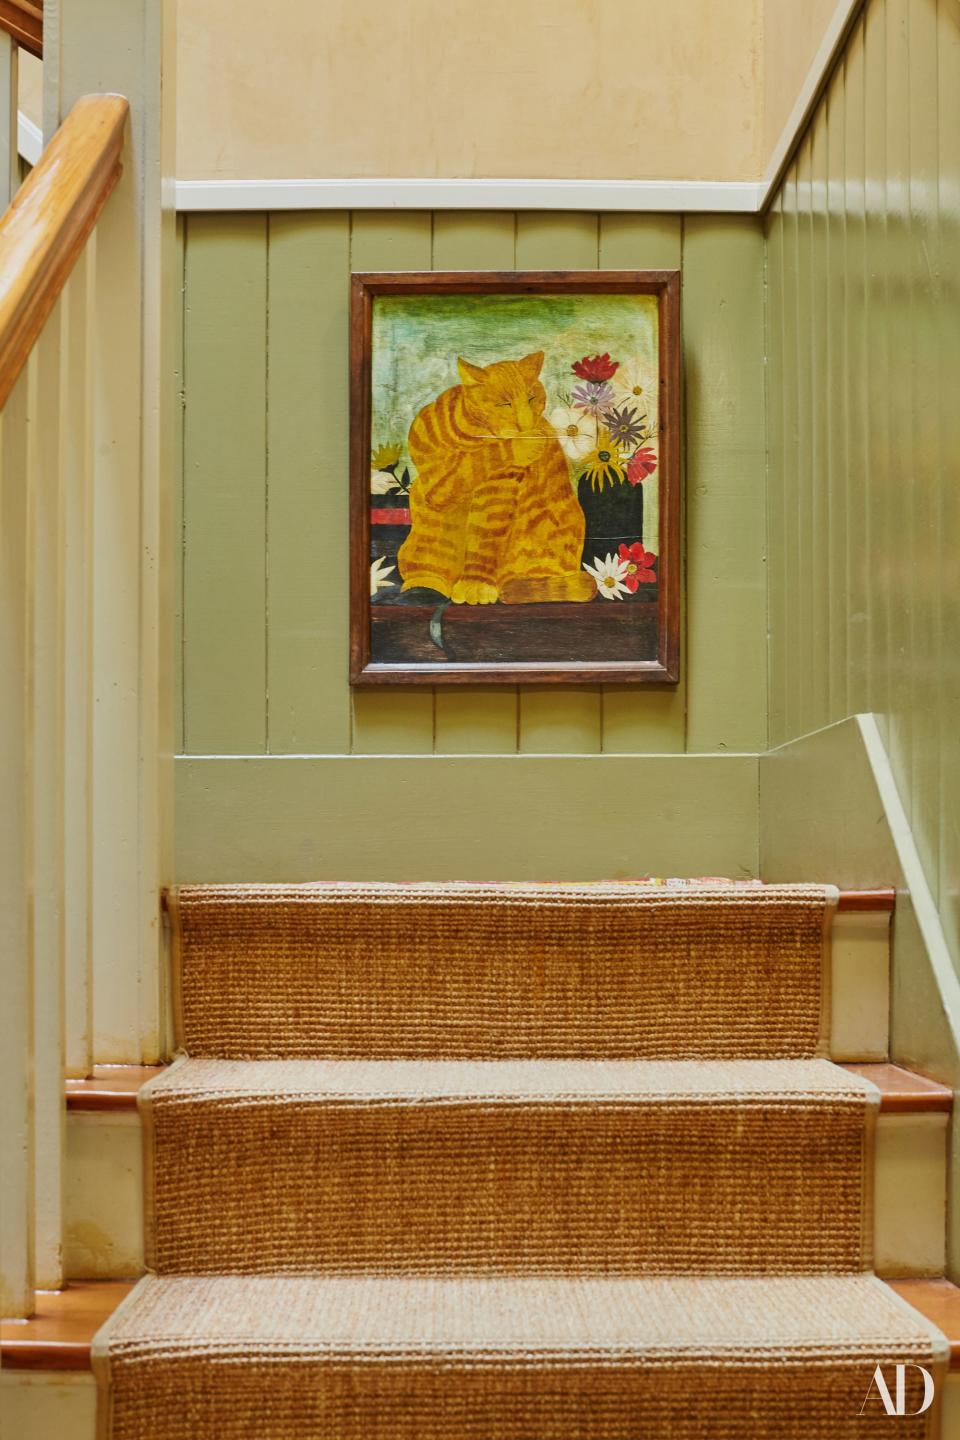 A painting of a cat and flowers—in keeping with the color scheme favored by Swedish painter Carl Larsson—is positioned on the staircase.